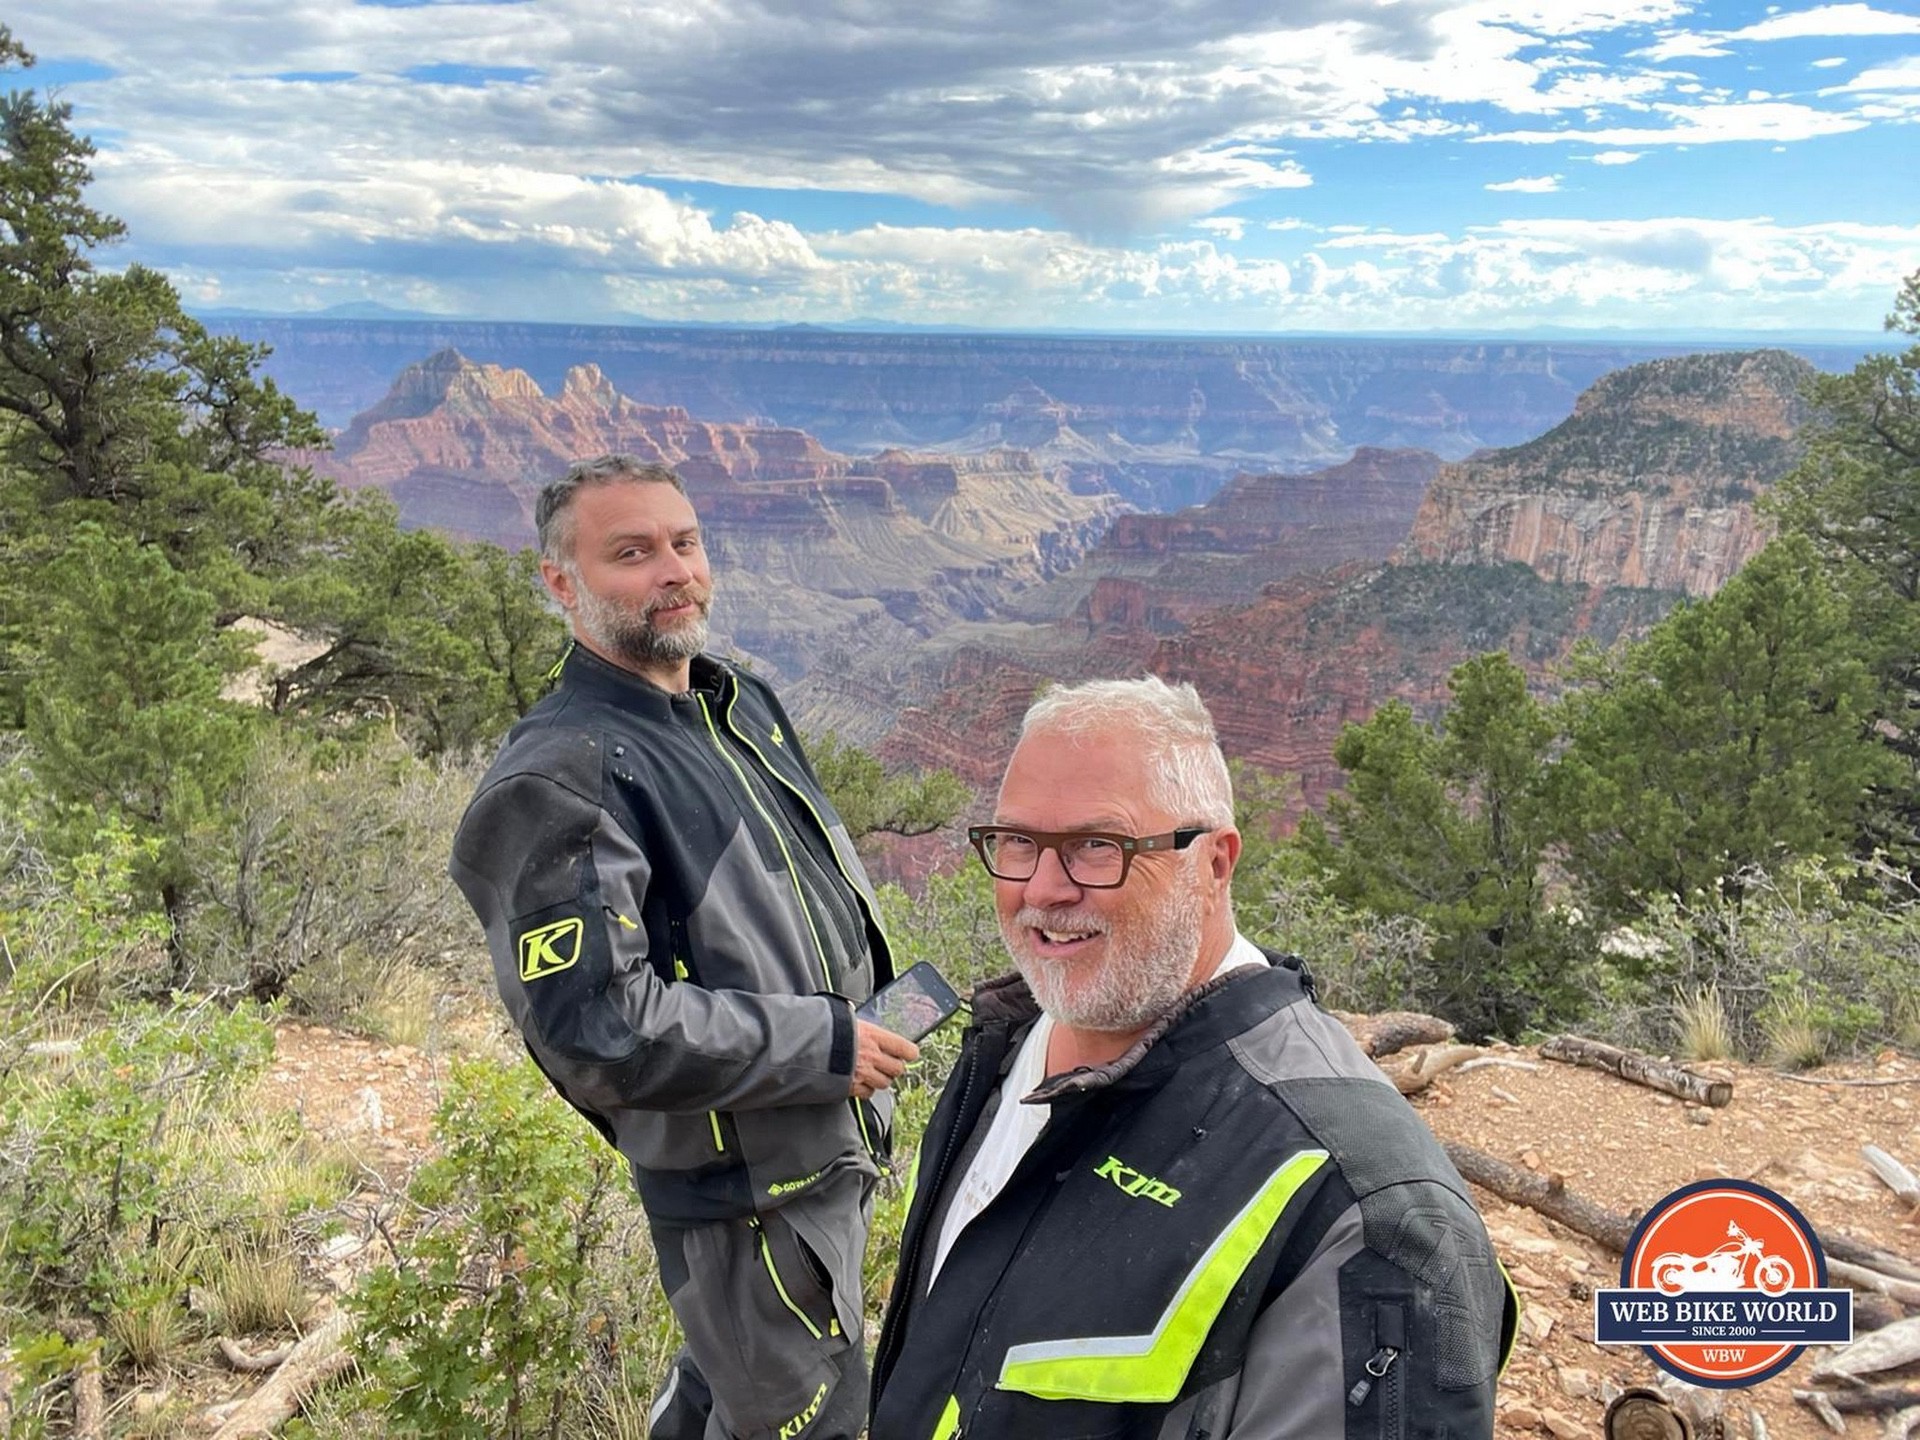 The Raptor GTX jacket brought me to such great destinations as the North Rim of the Grand Canyon